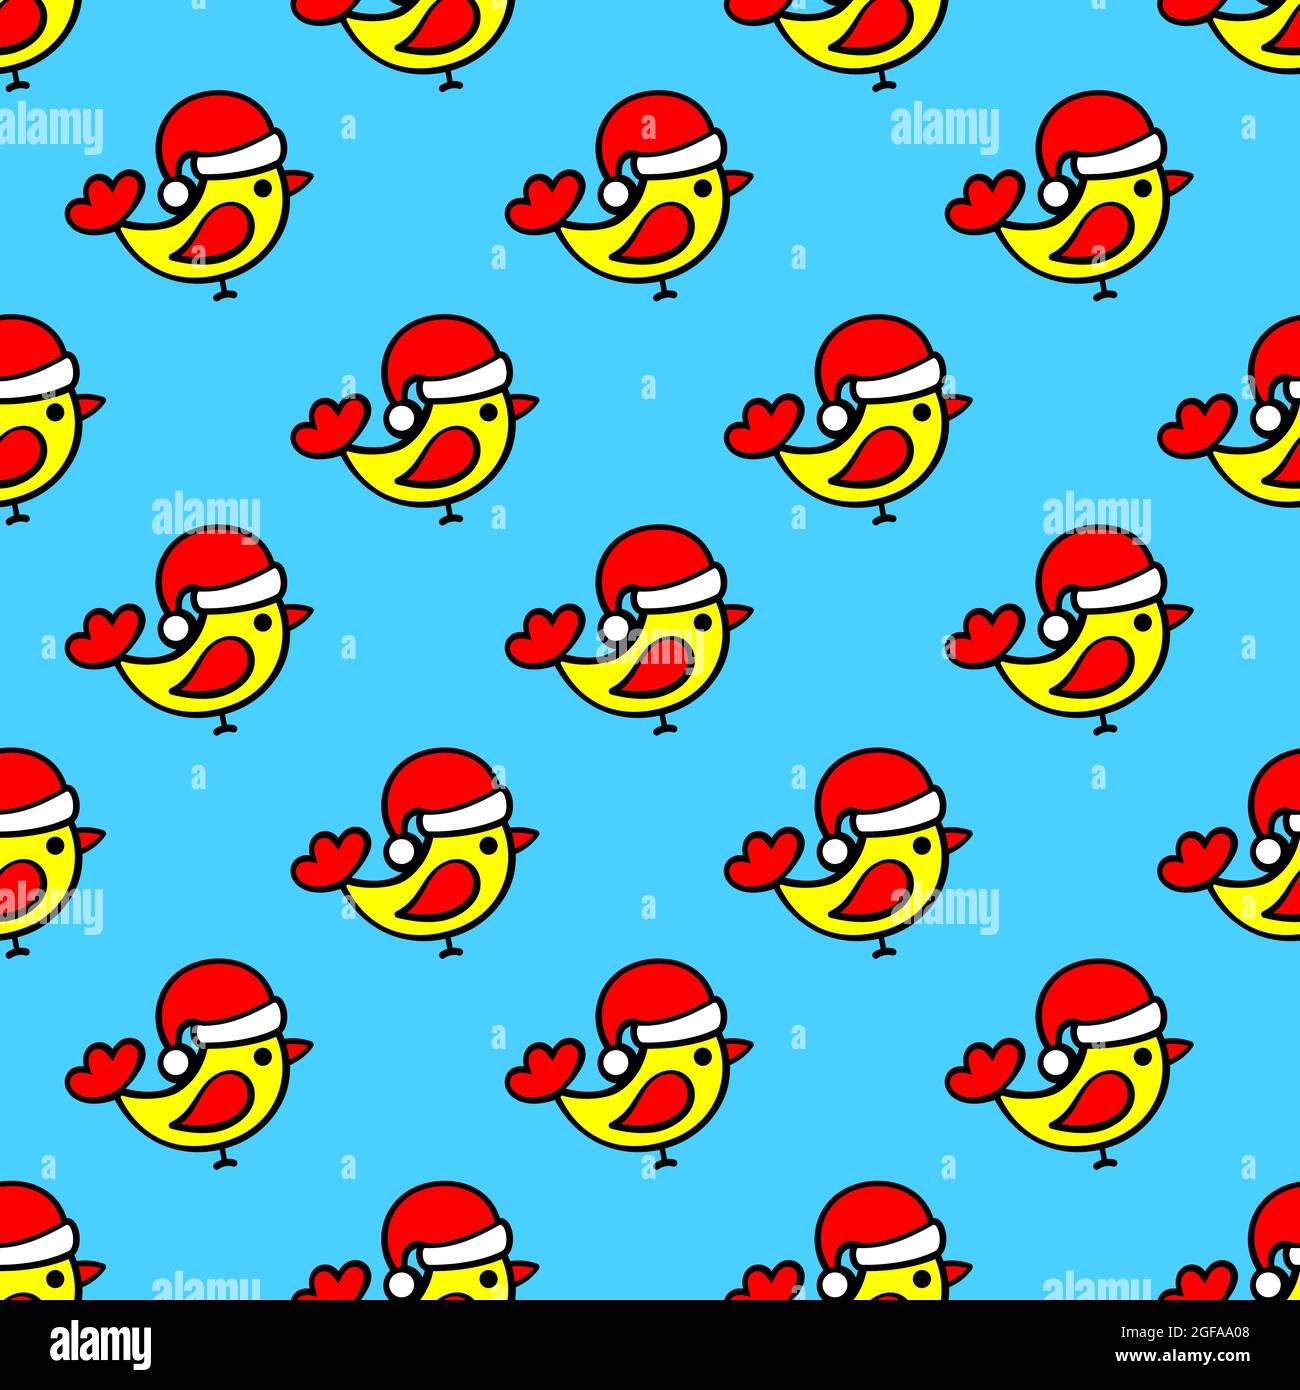 Yellow birds in a red hat Santa Claus on a blue background. New Years print concept. Seamless pattern for printing on textiles, packaging Stock Vector